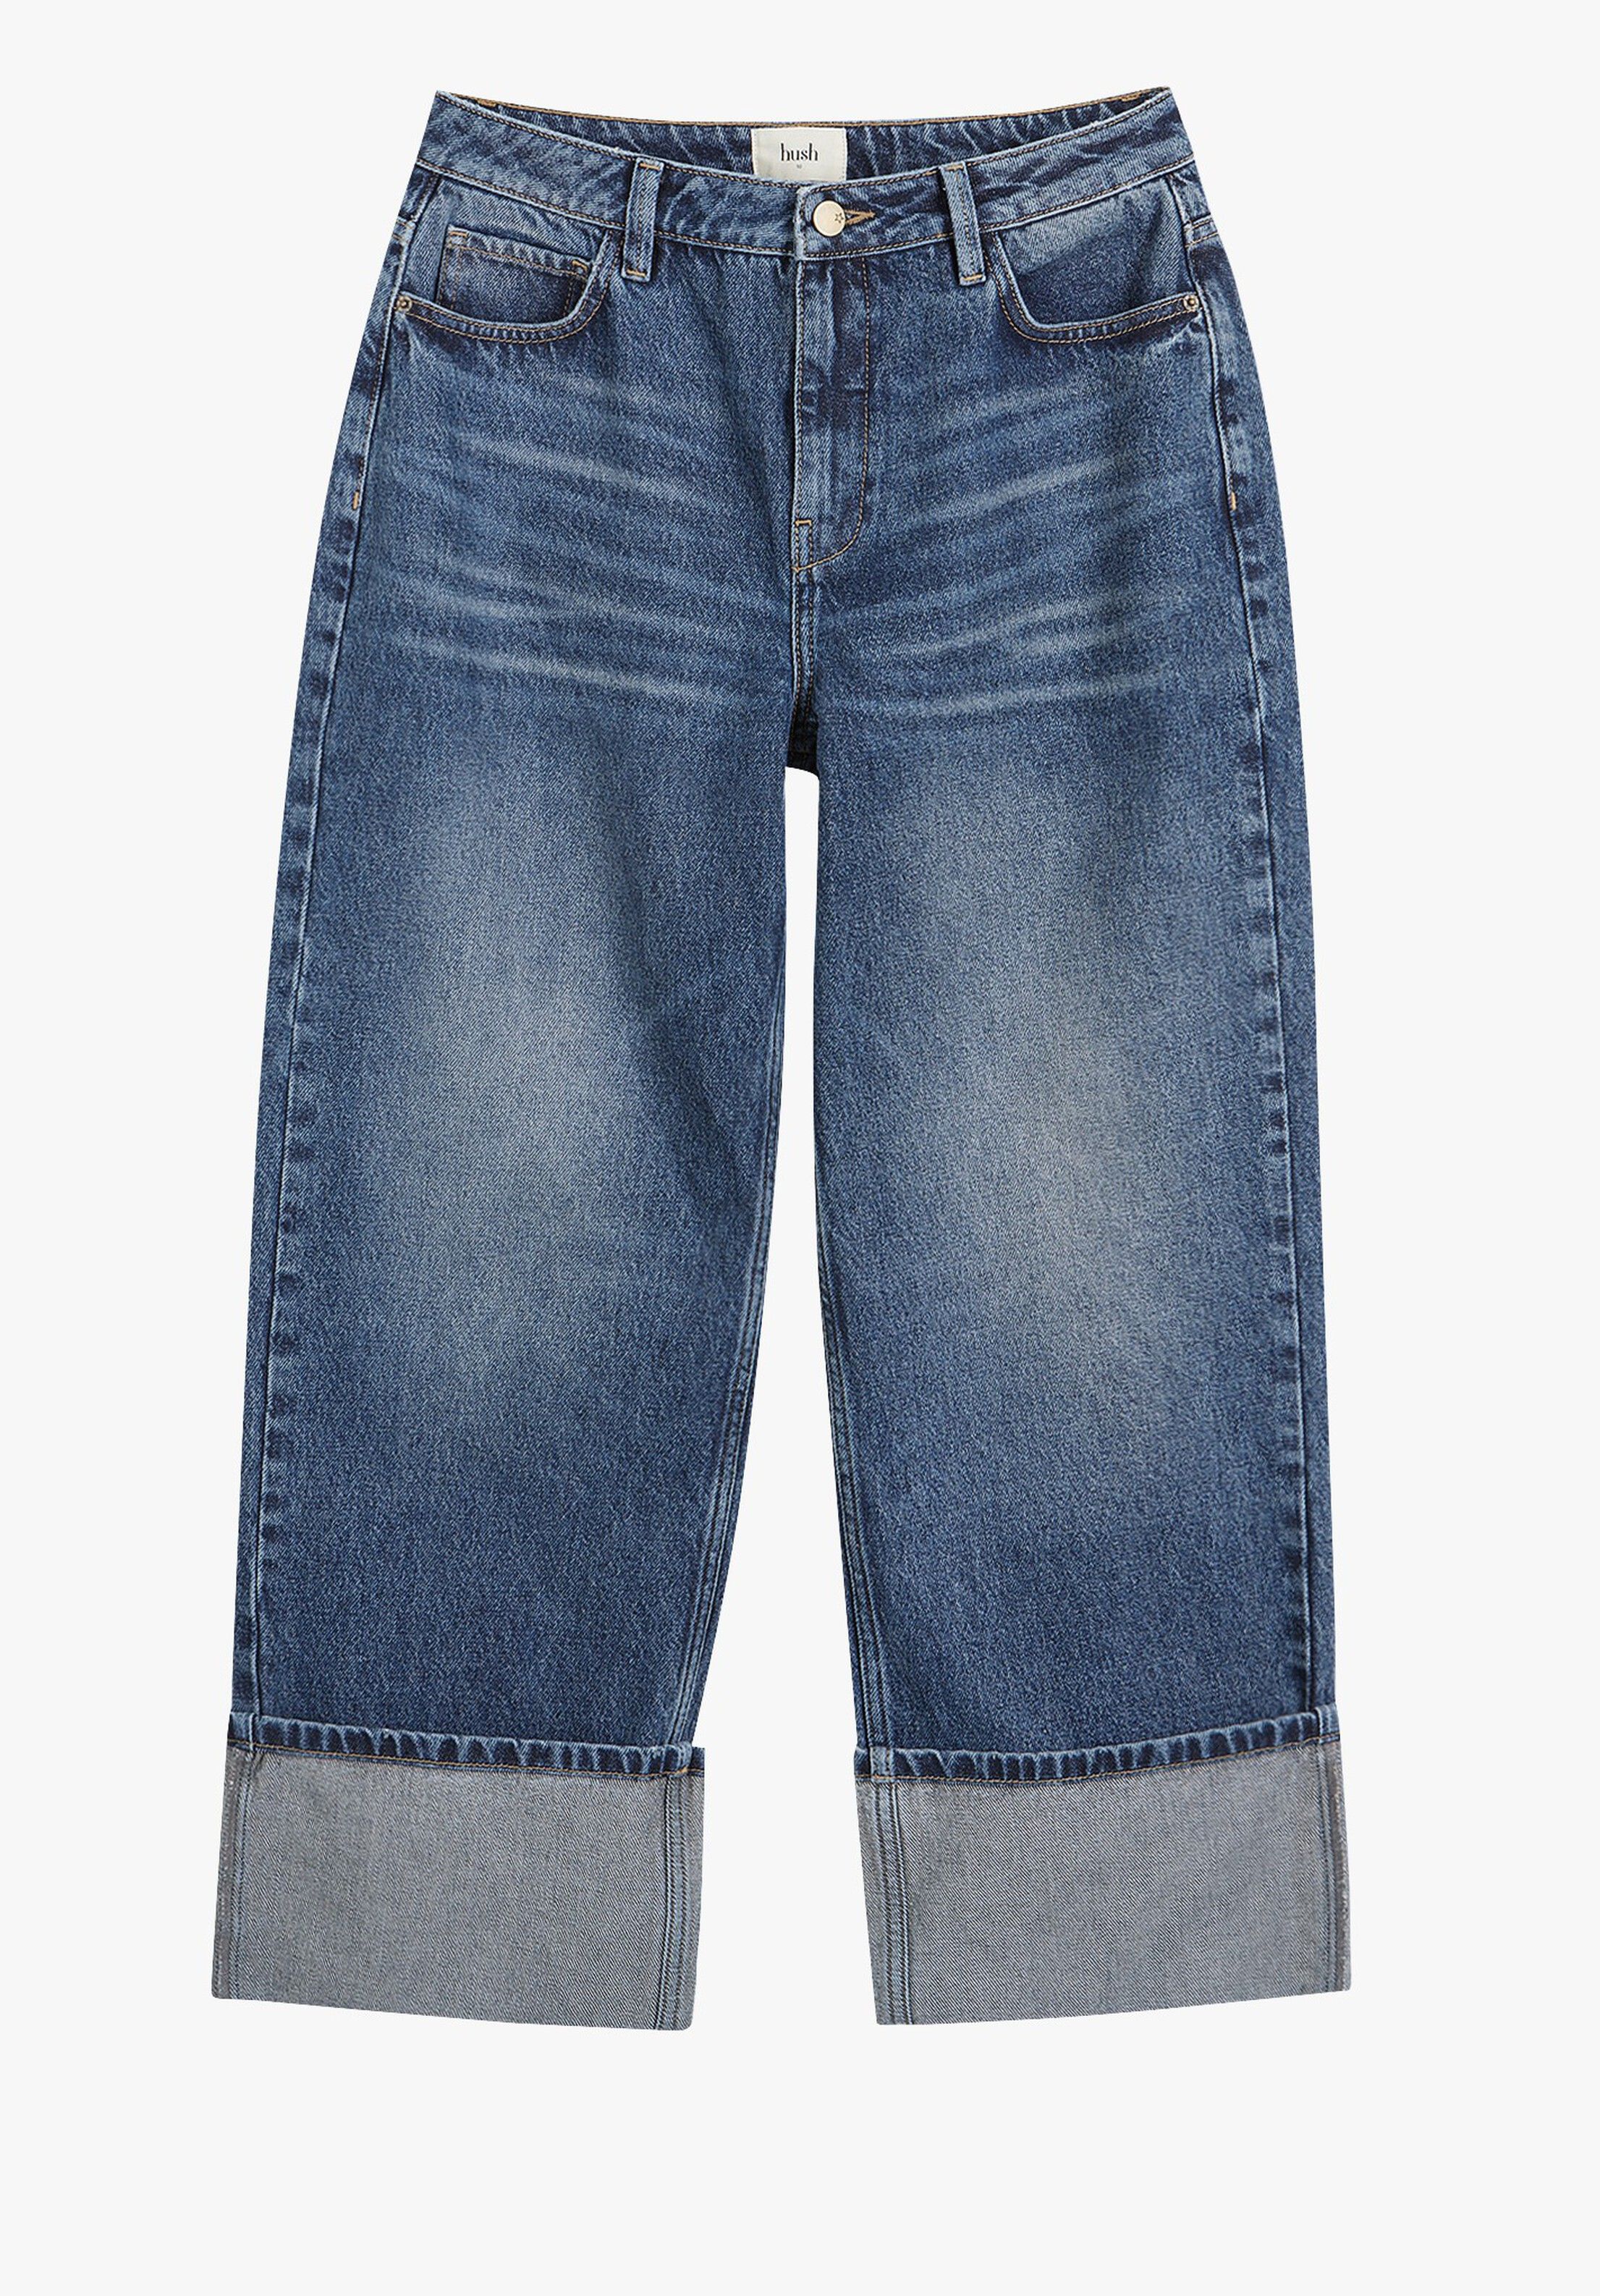 Carly Turn Up Cropped Jeans | Hush UK